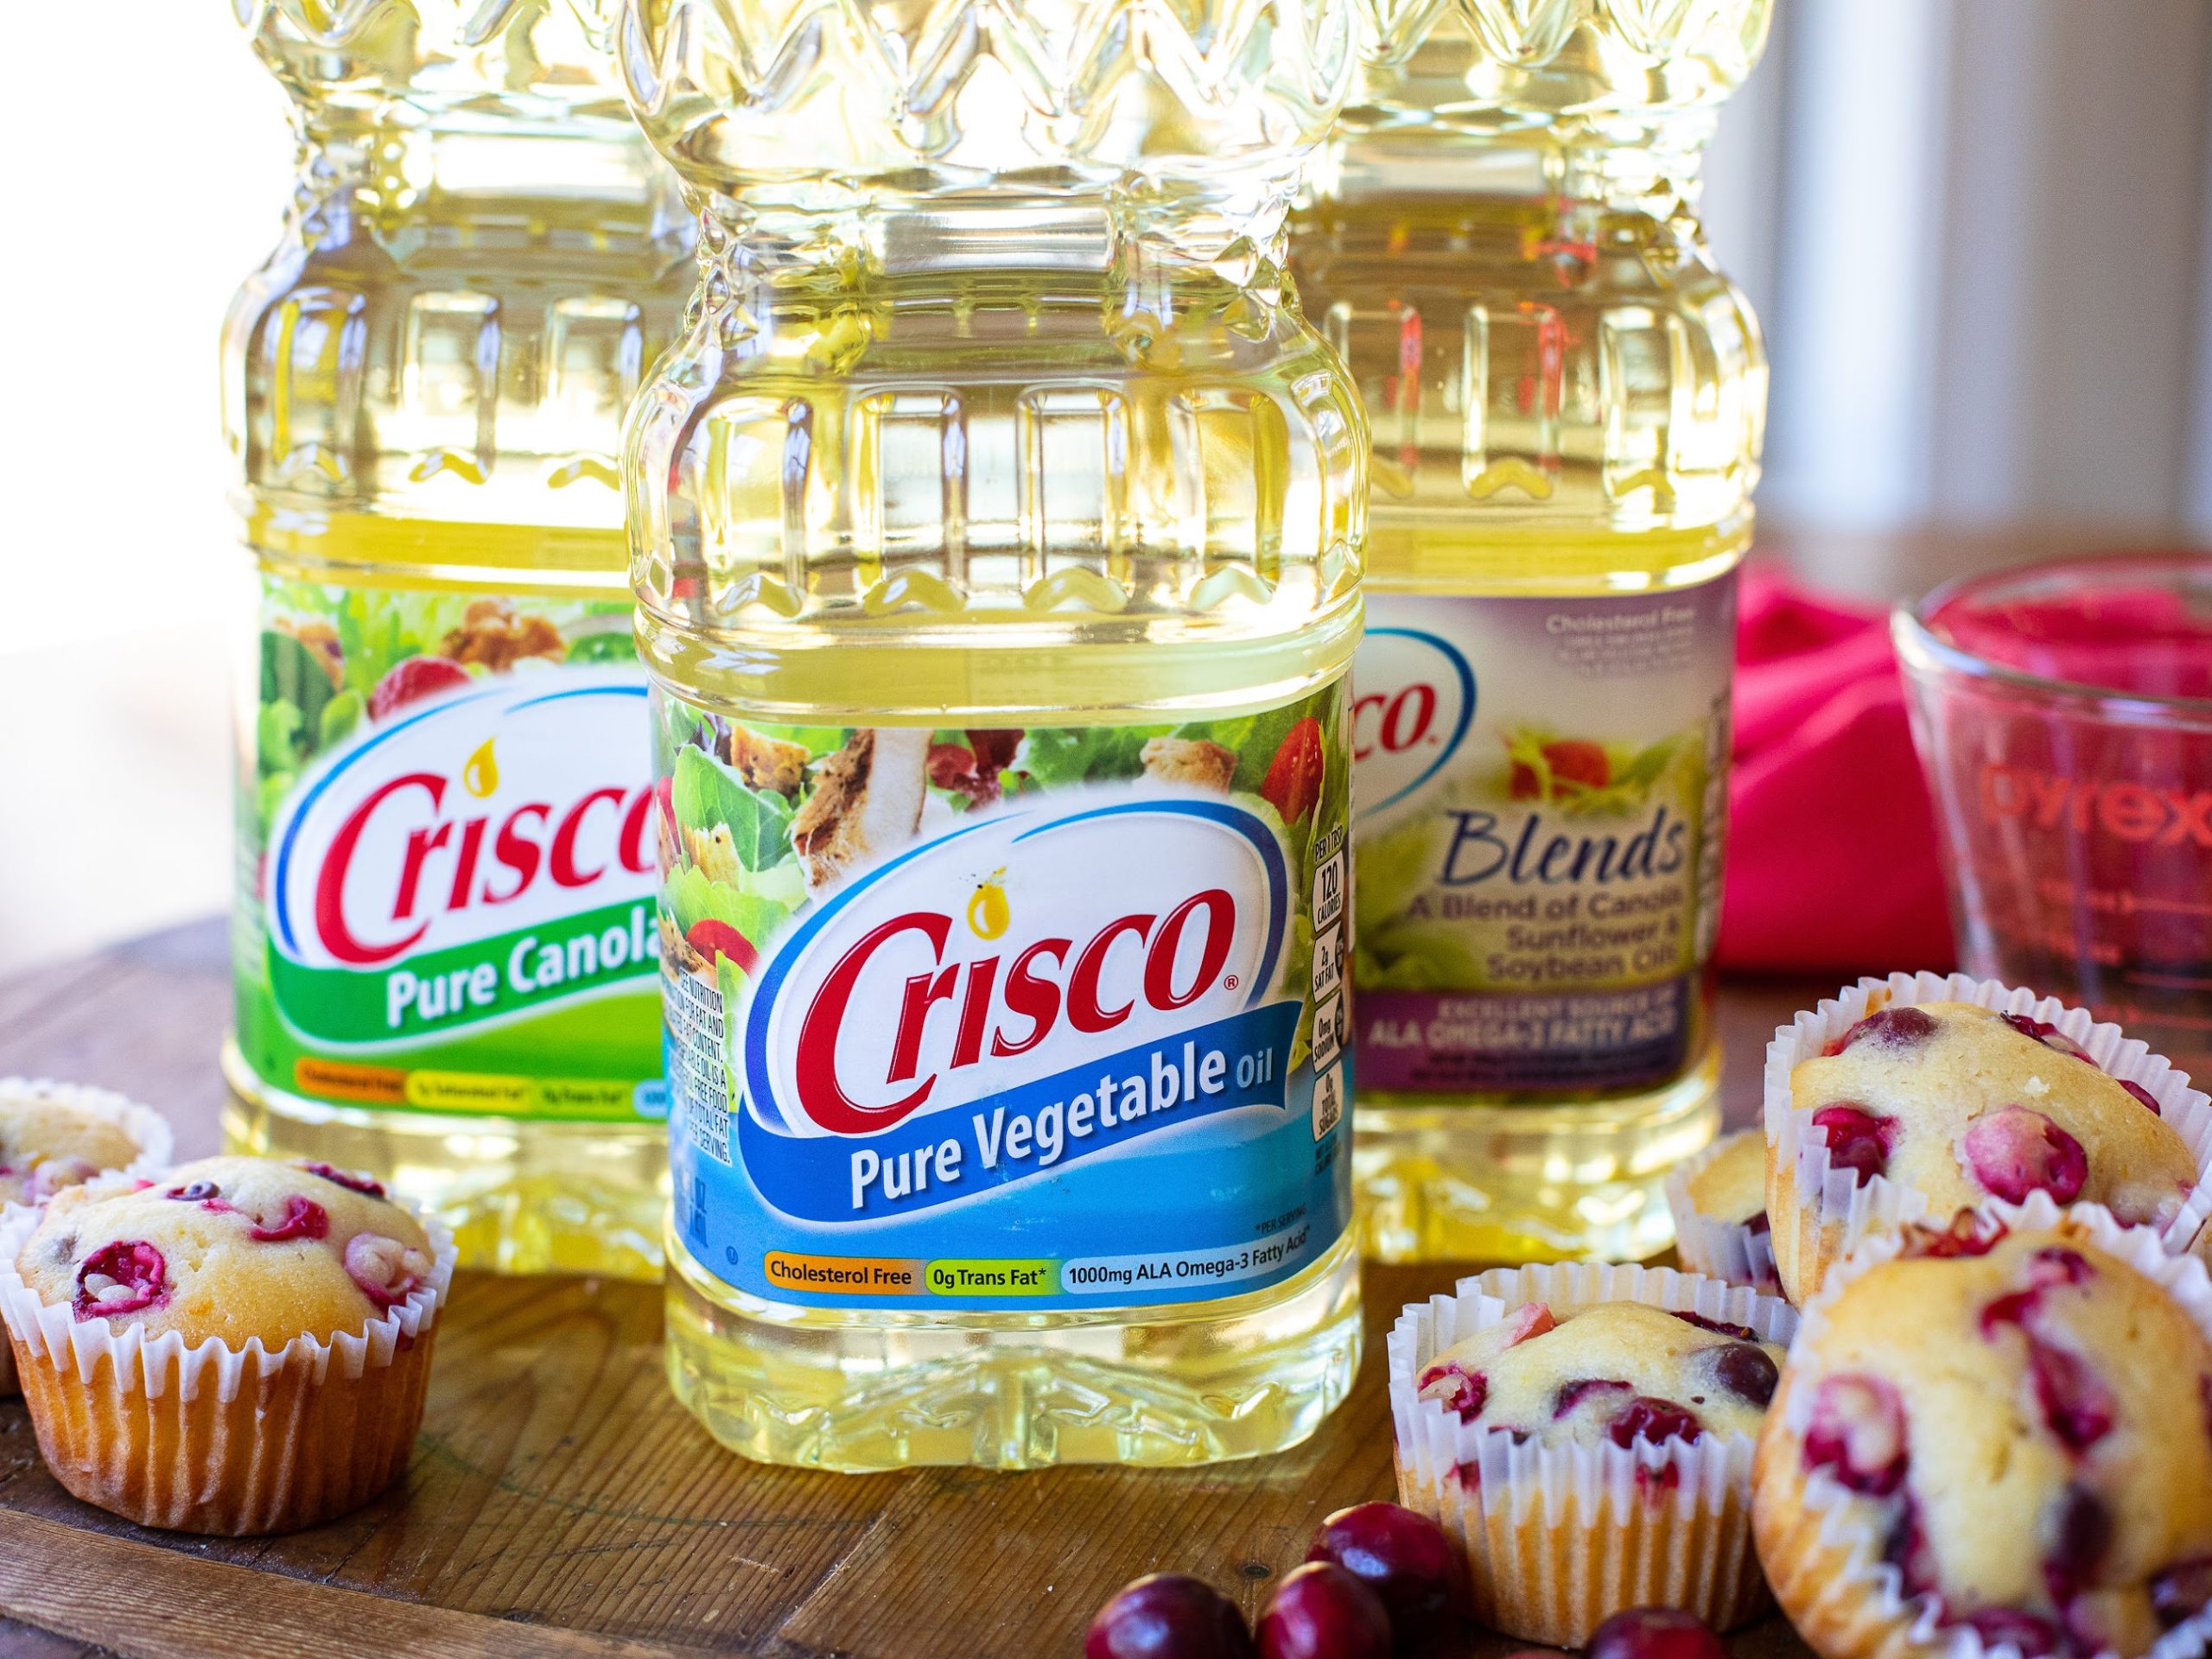 Crisco Oil Is Perfect For All Of Your Holiday Cooking Needs on I Heart Publix